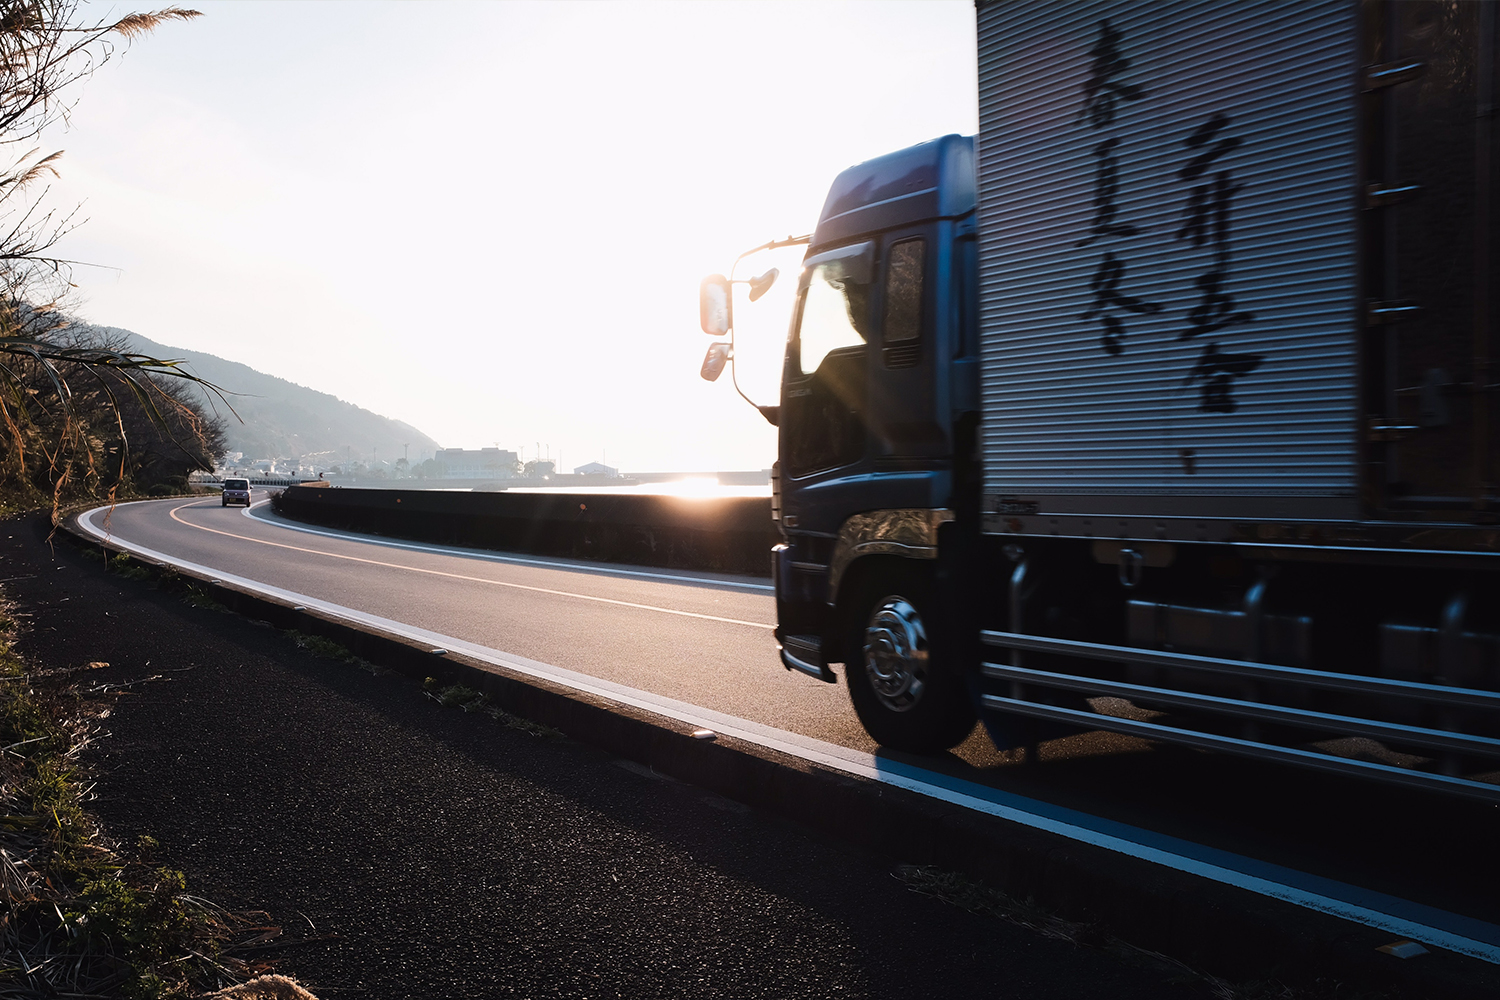 A Chinese delivery lorry on the highway with a sunrise in the background